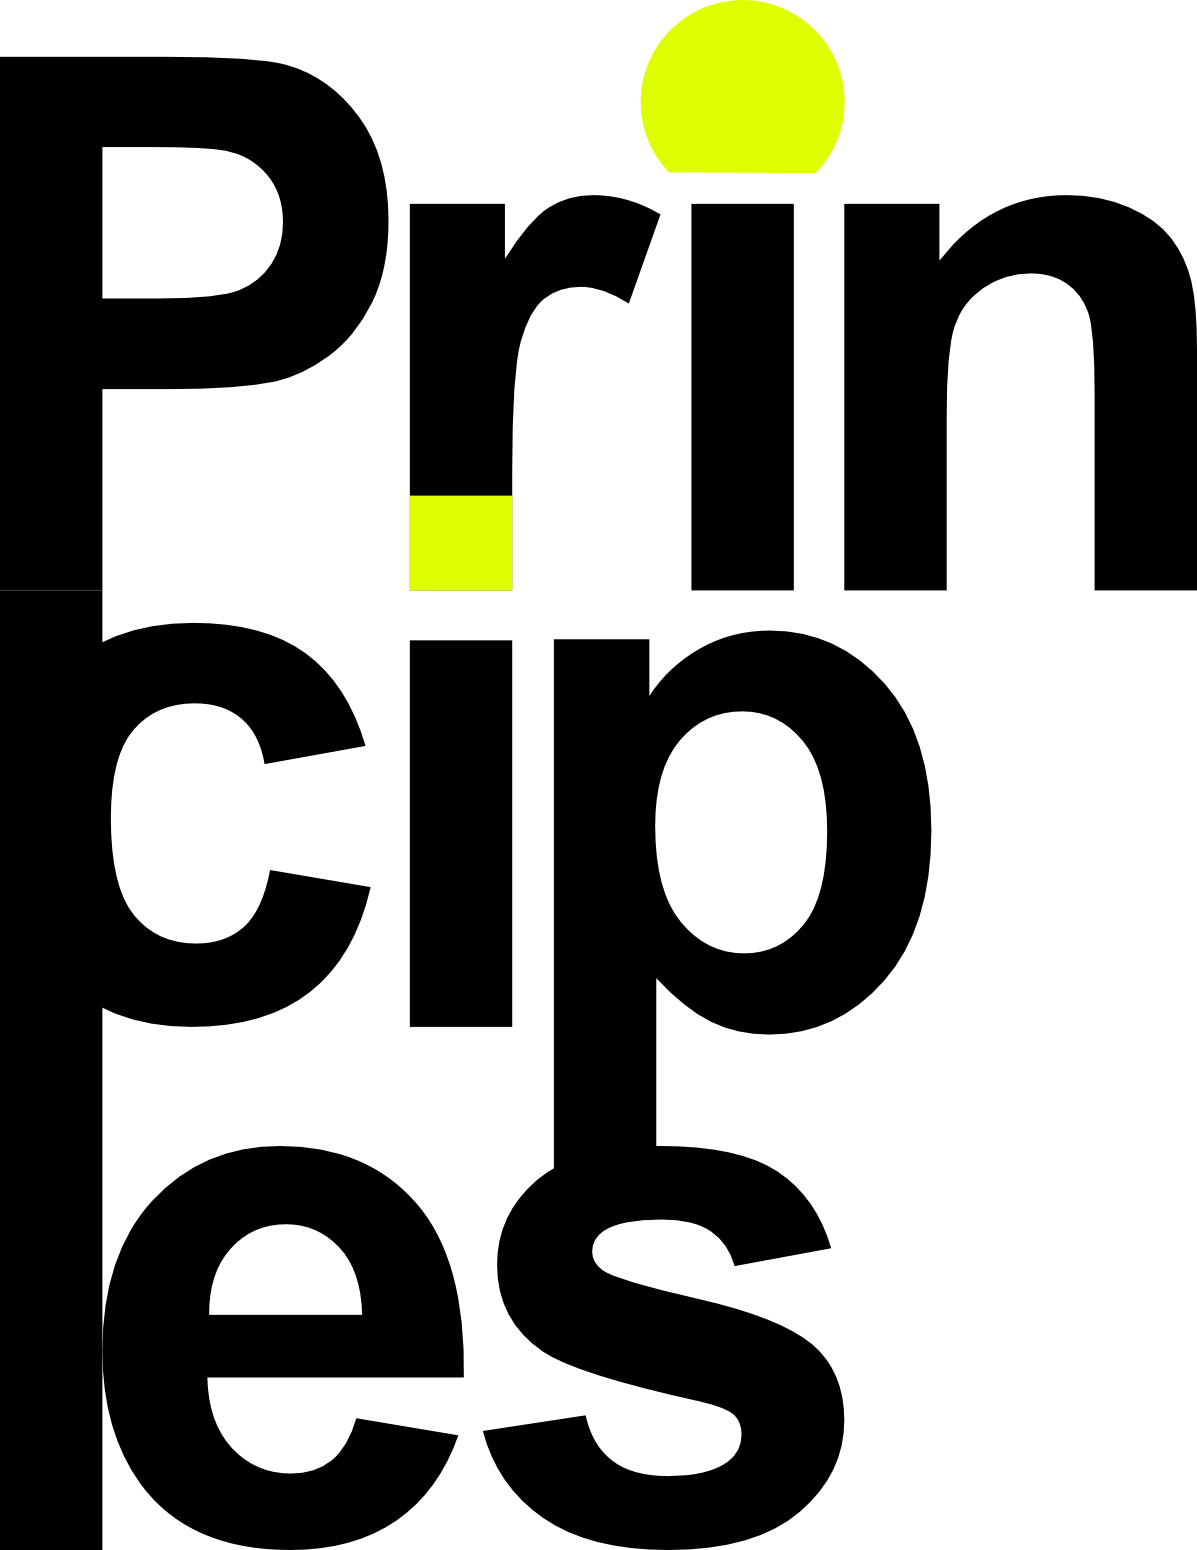 A black and yellow text graphic saying "Principles"